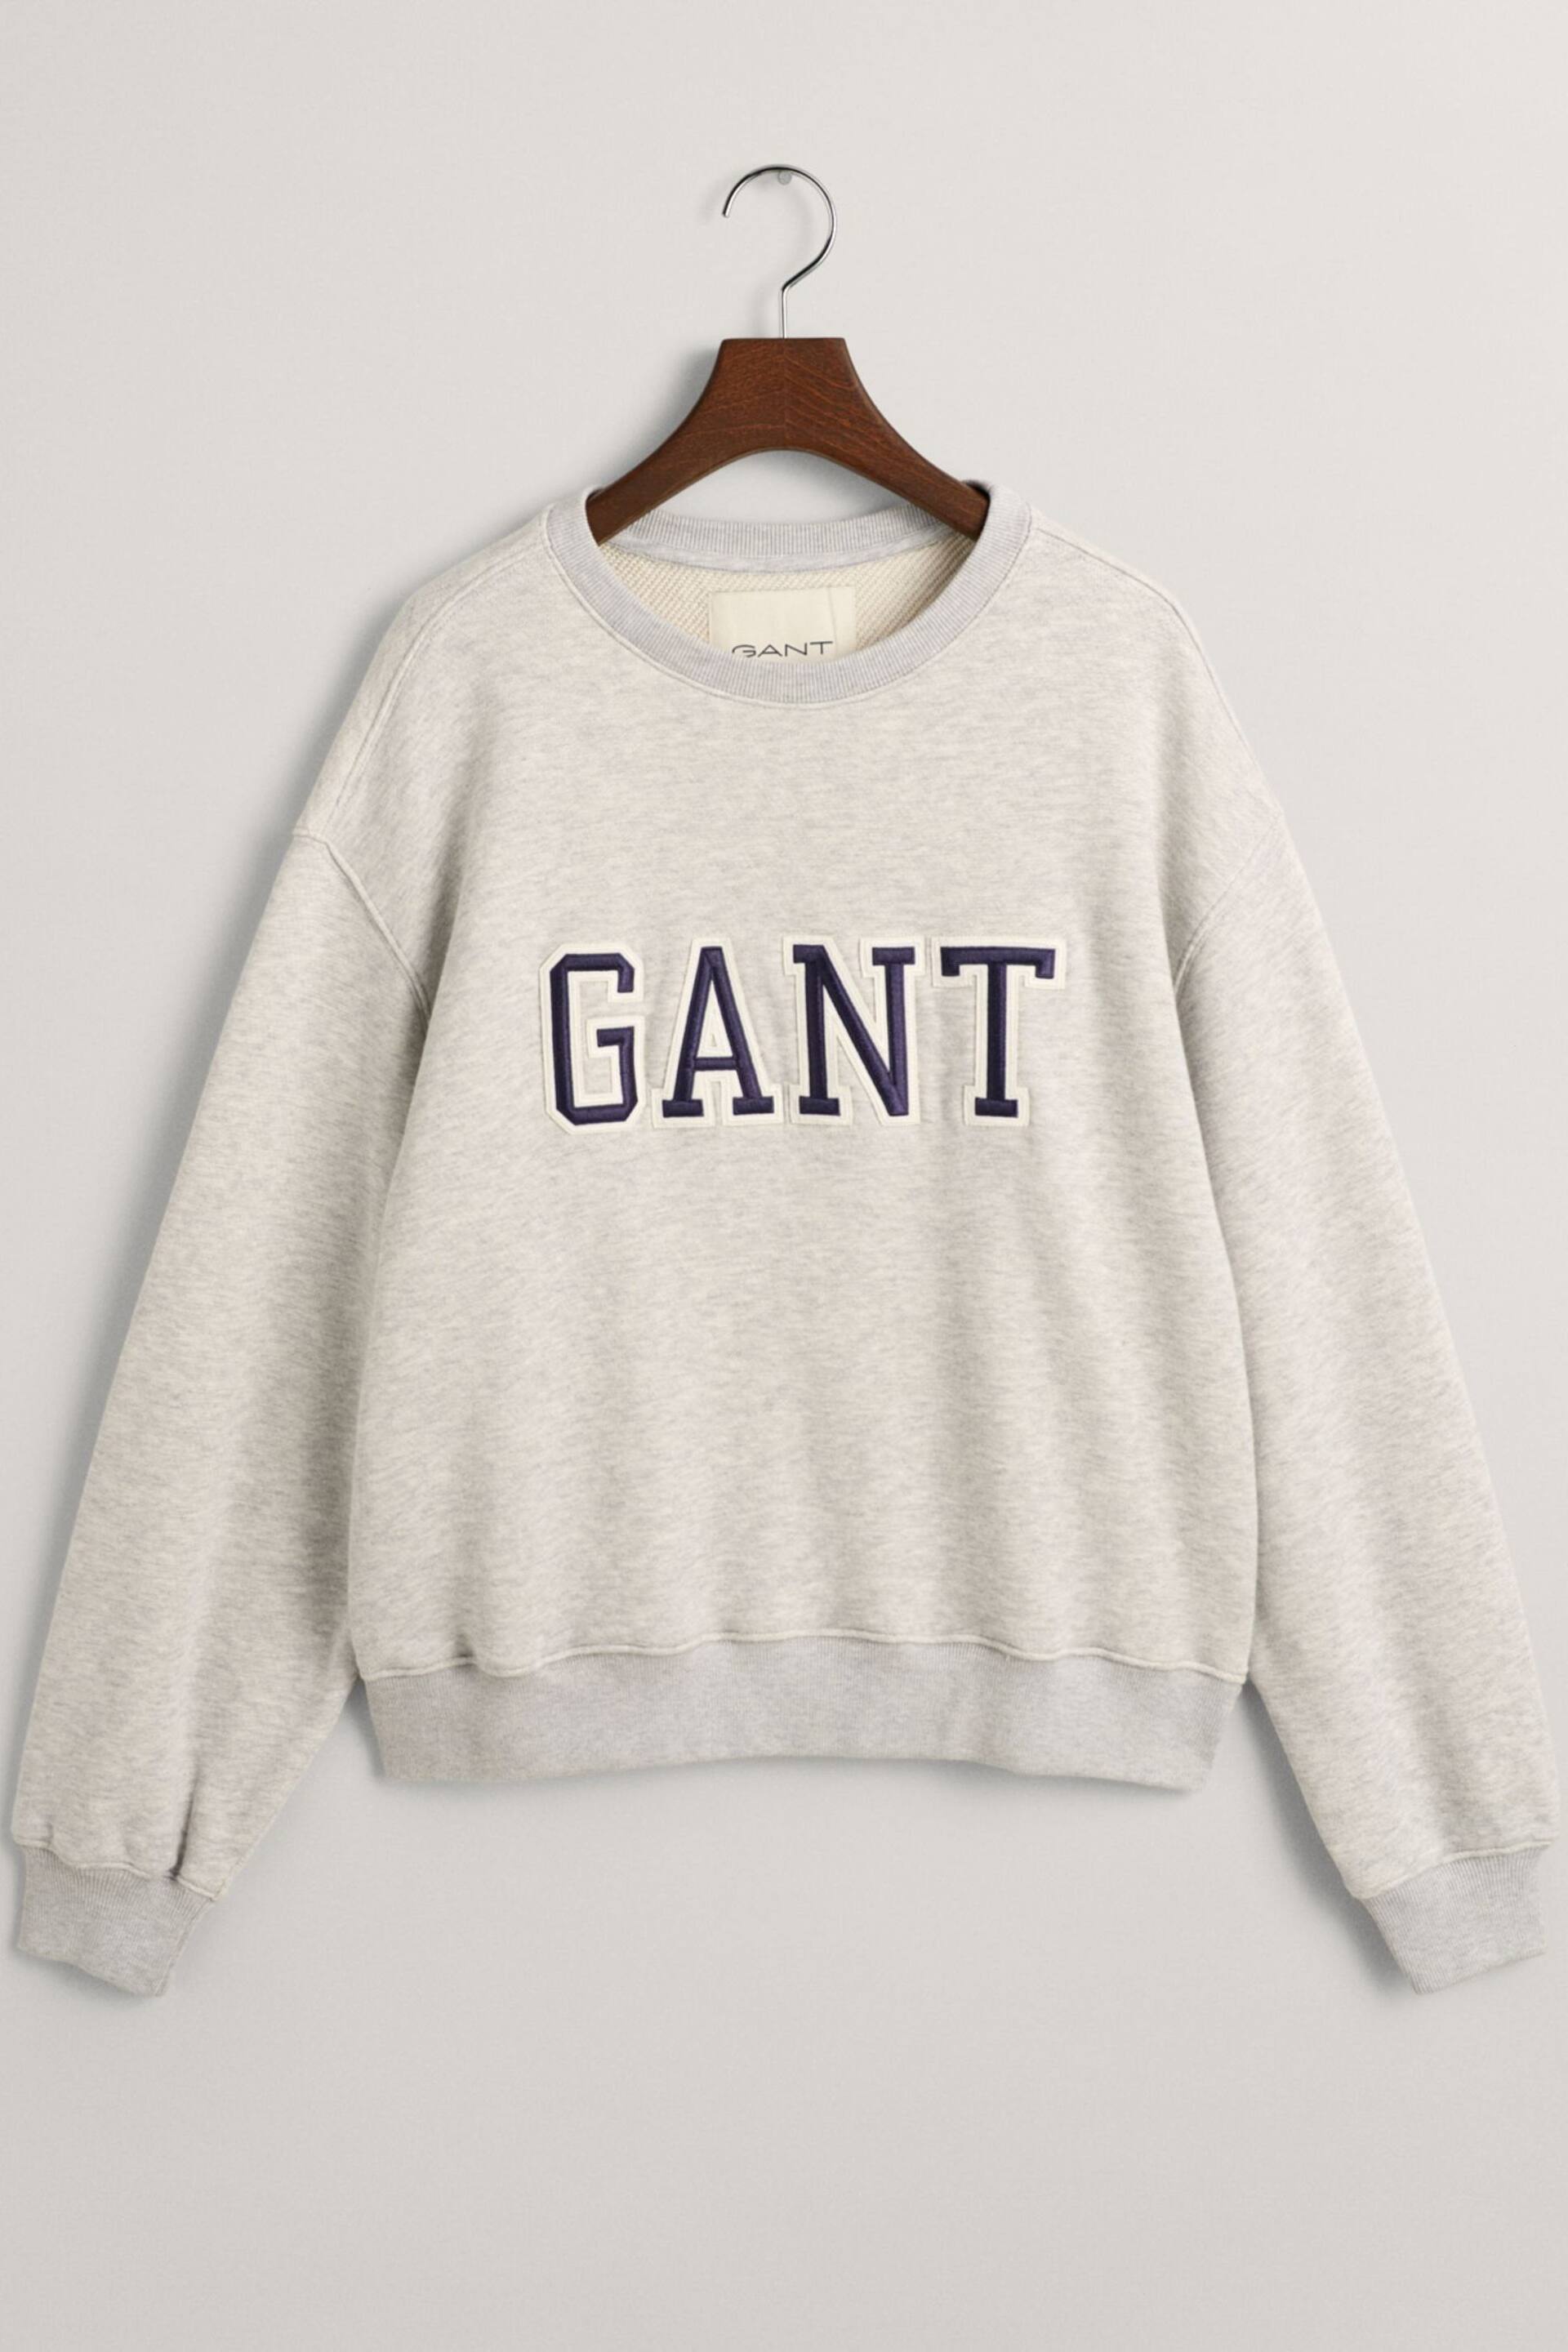 GANT Grey Embroidered Logo Relaxed Fit Sweatshirt - Image 4 of 4